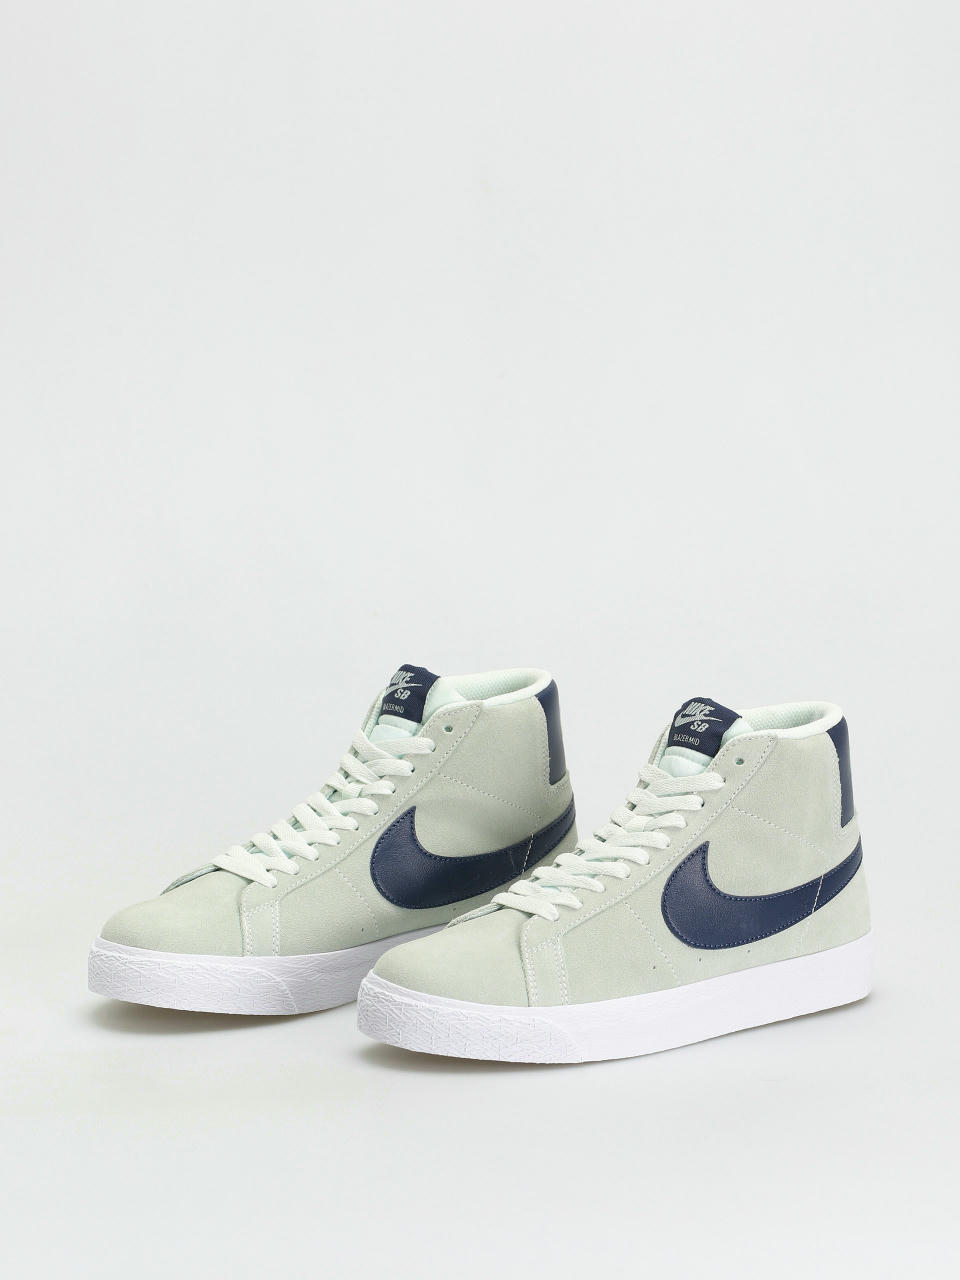 Nike SB Zoom Blazer Mid Shoes (barely green/navy barely green white)